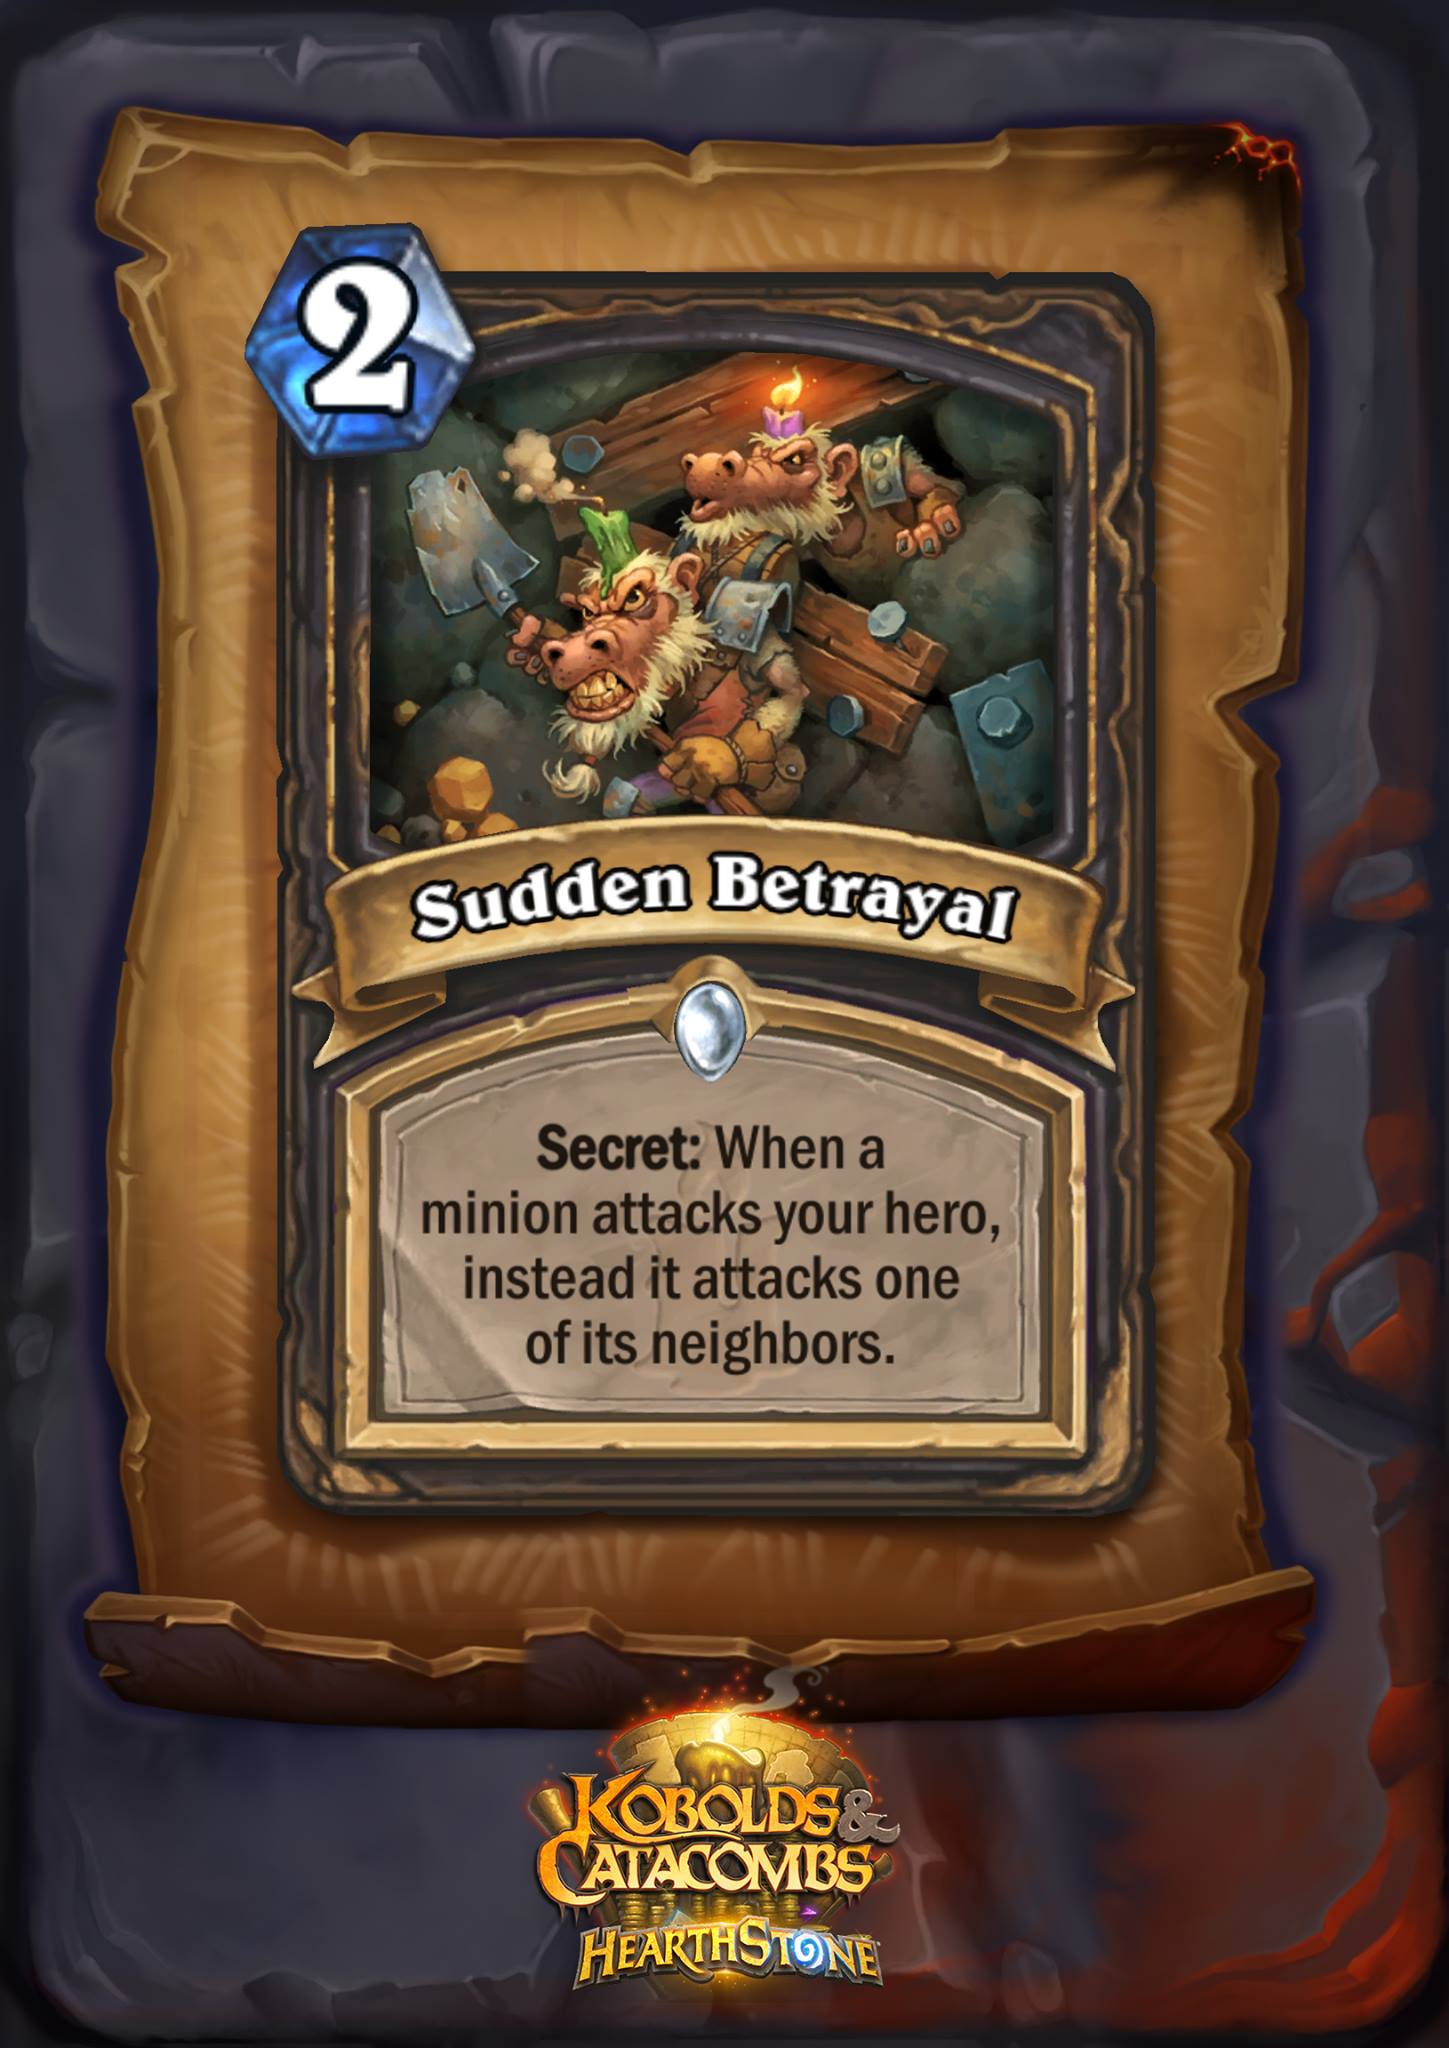 Blizzard just revealed 9 new cards from Hearthstone's next expansion